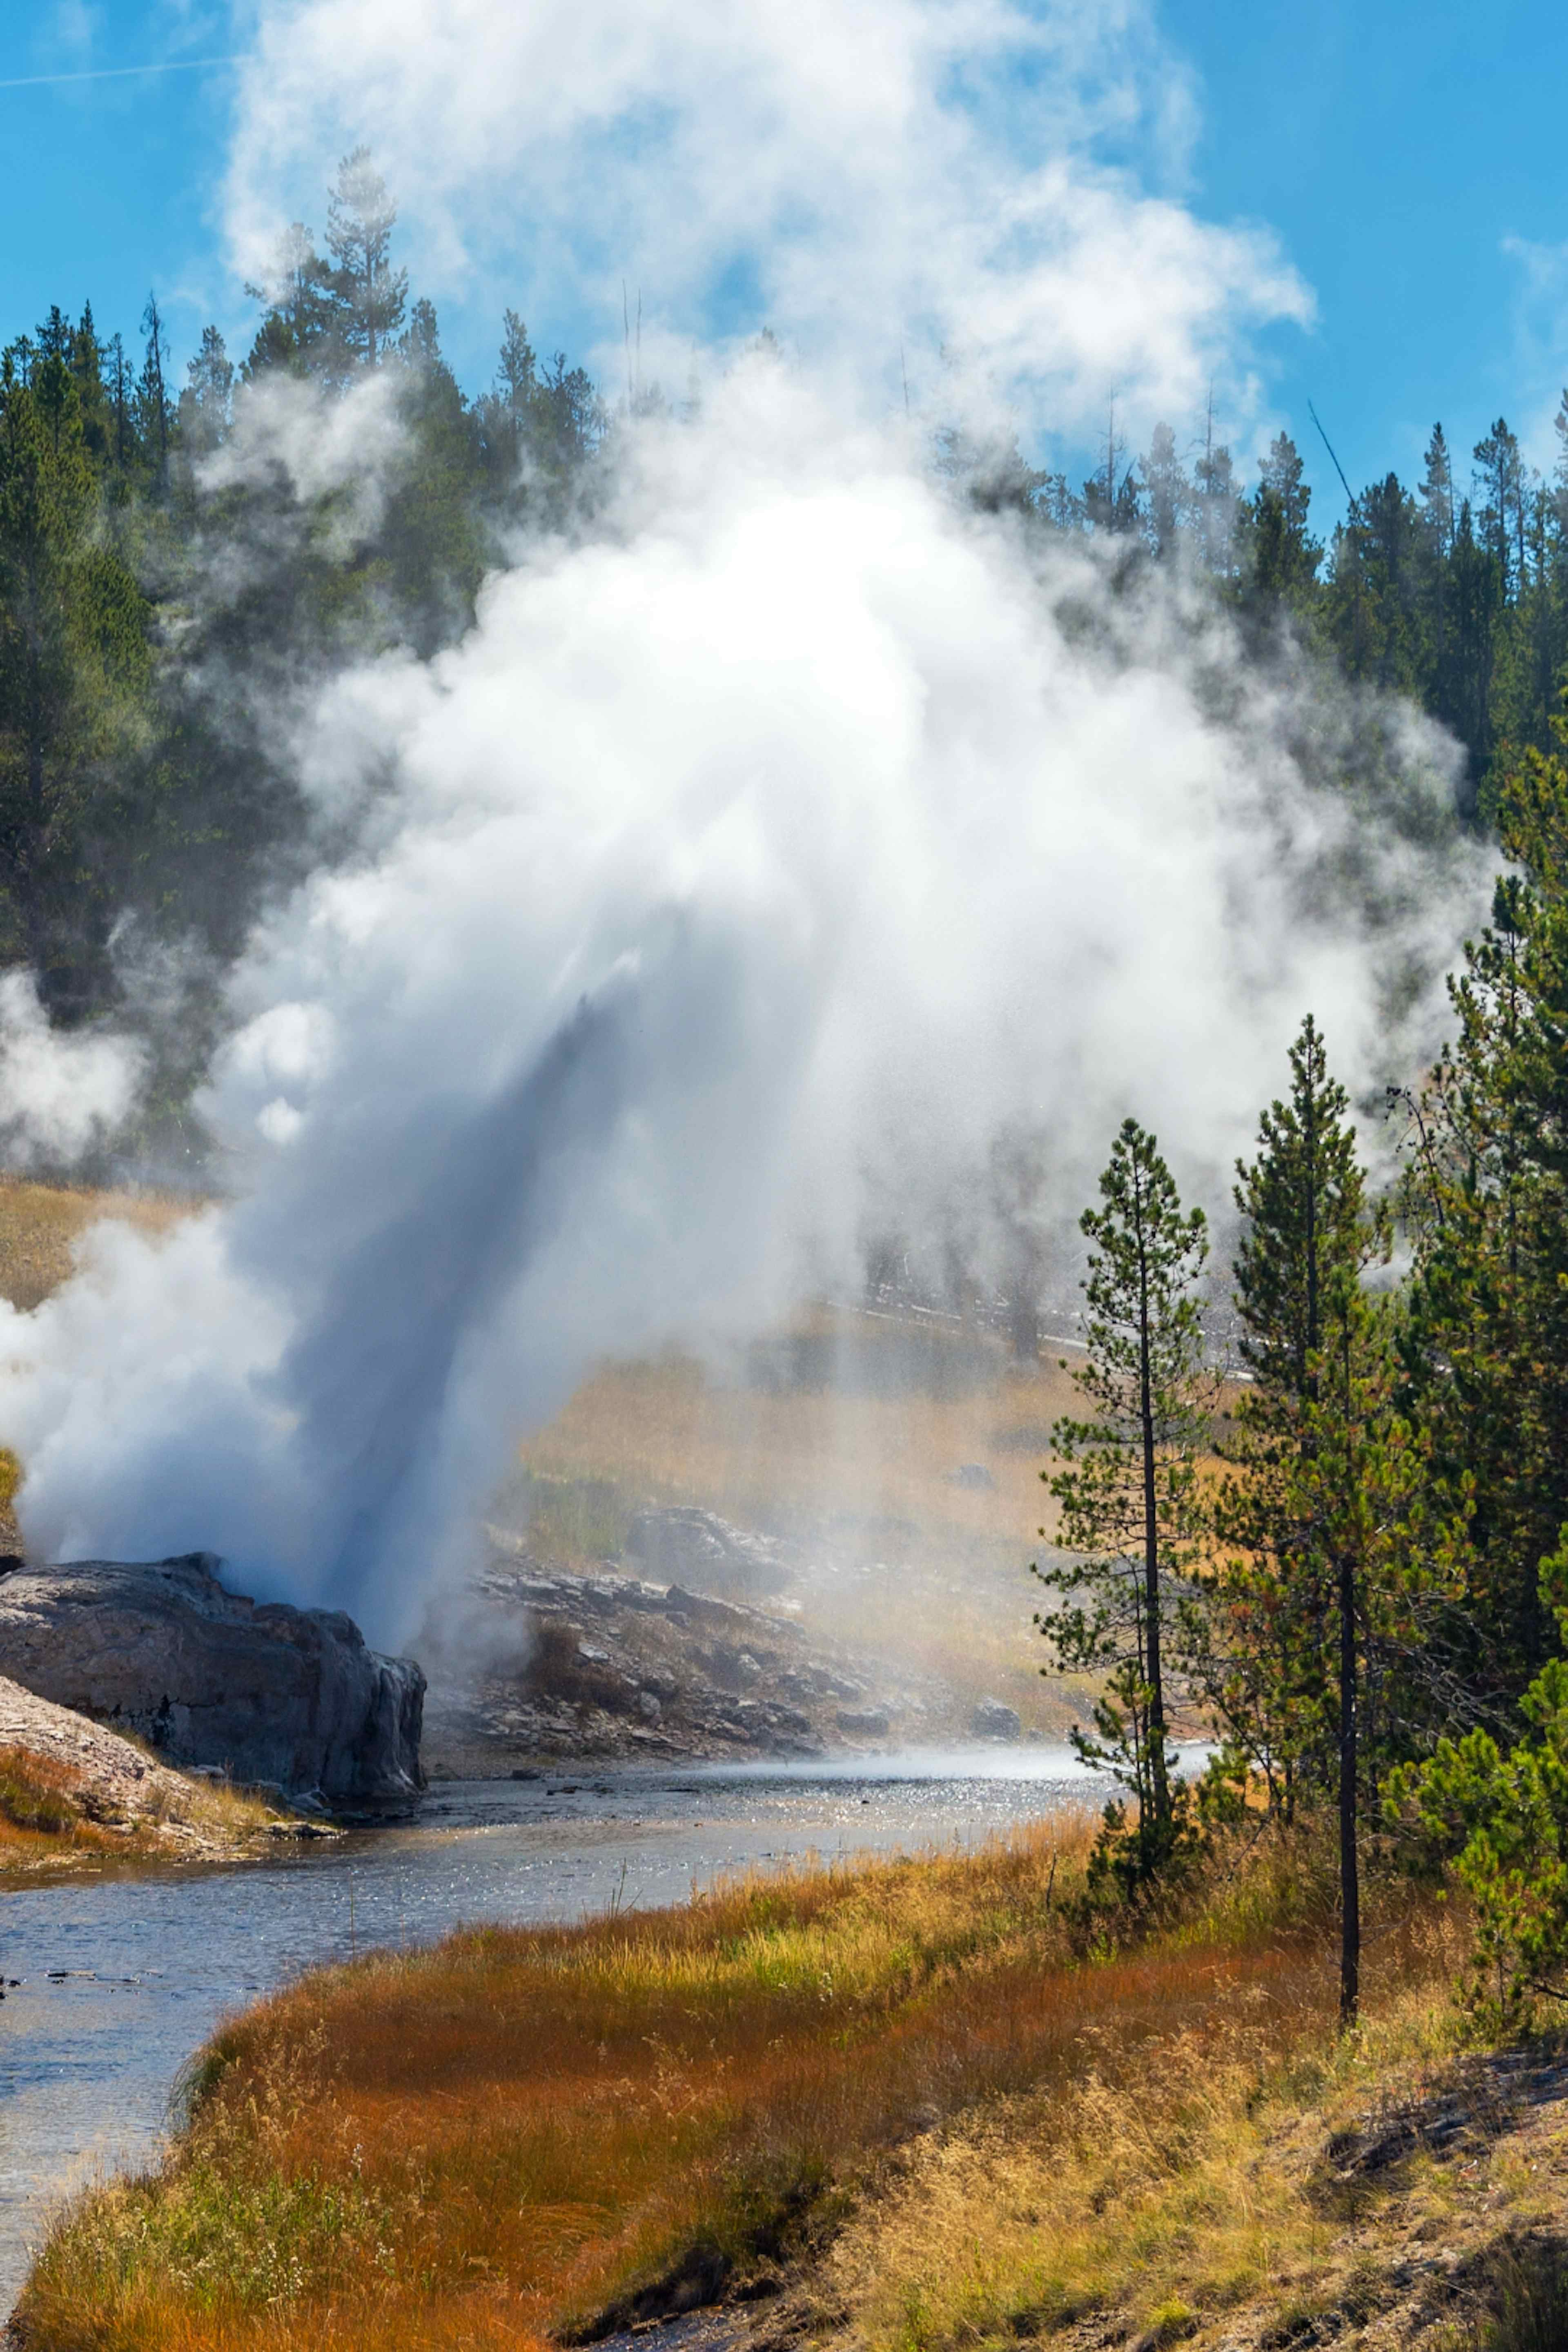 A geothermal feature spews steam at Grand Prismatic Pond in Yellowstone National Park.